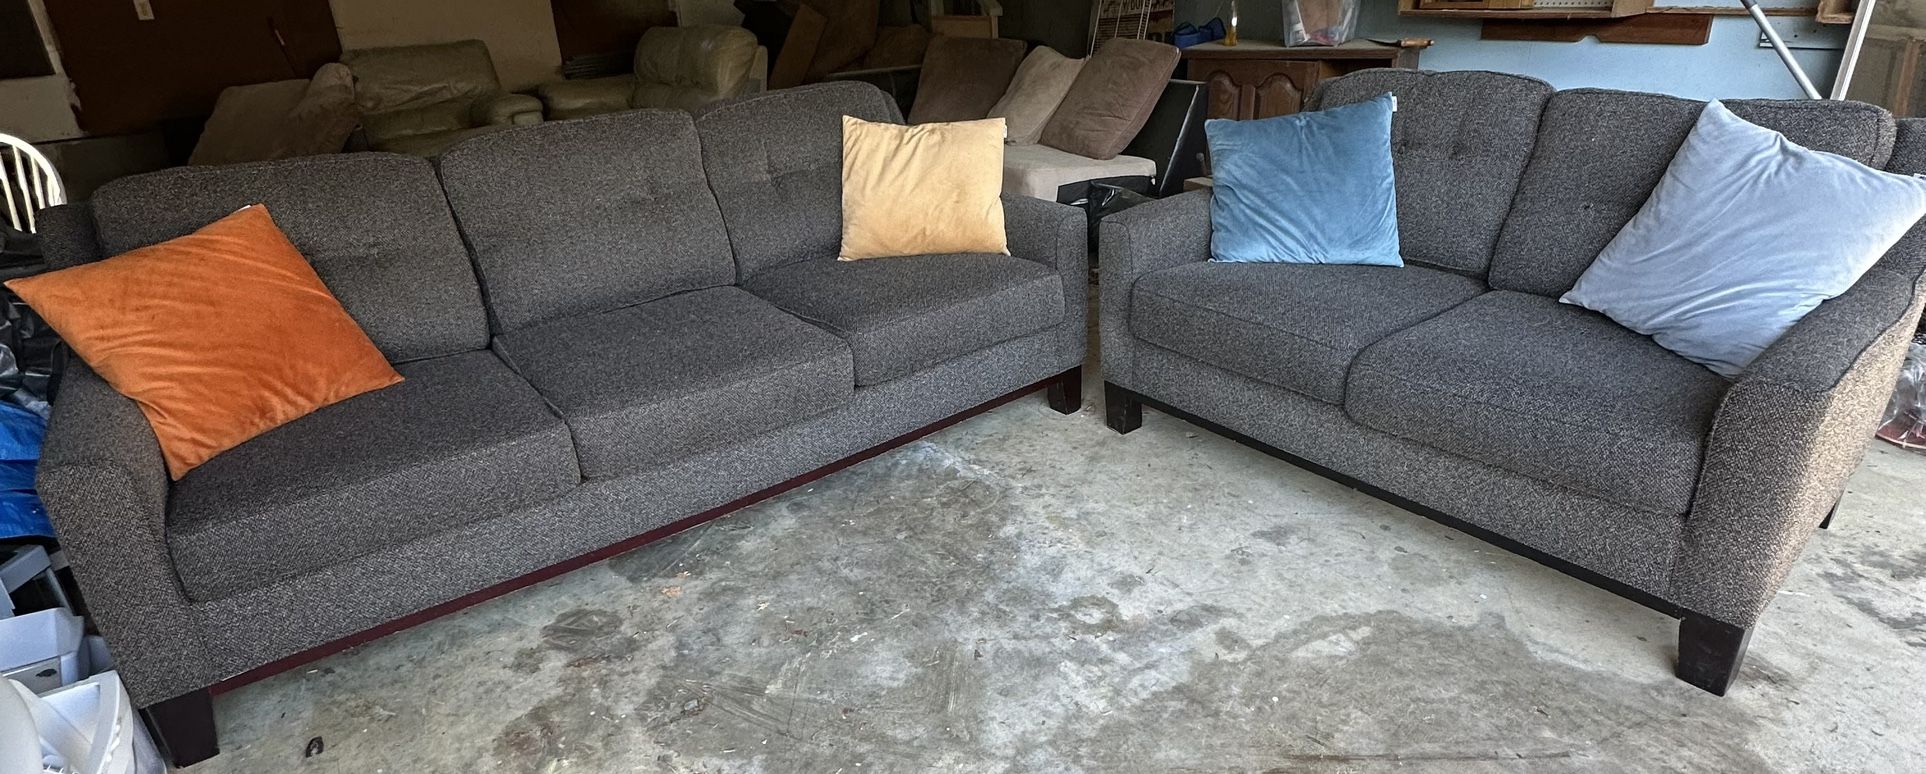 Couch & Loveseat - Free Delivery